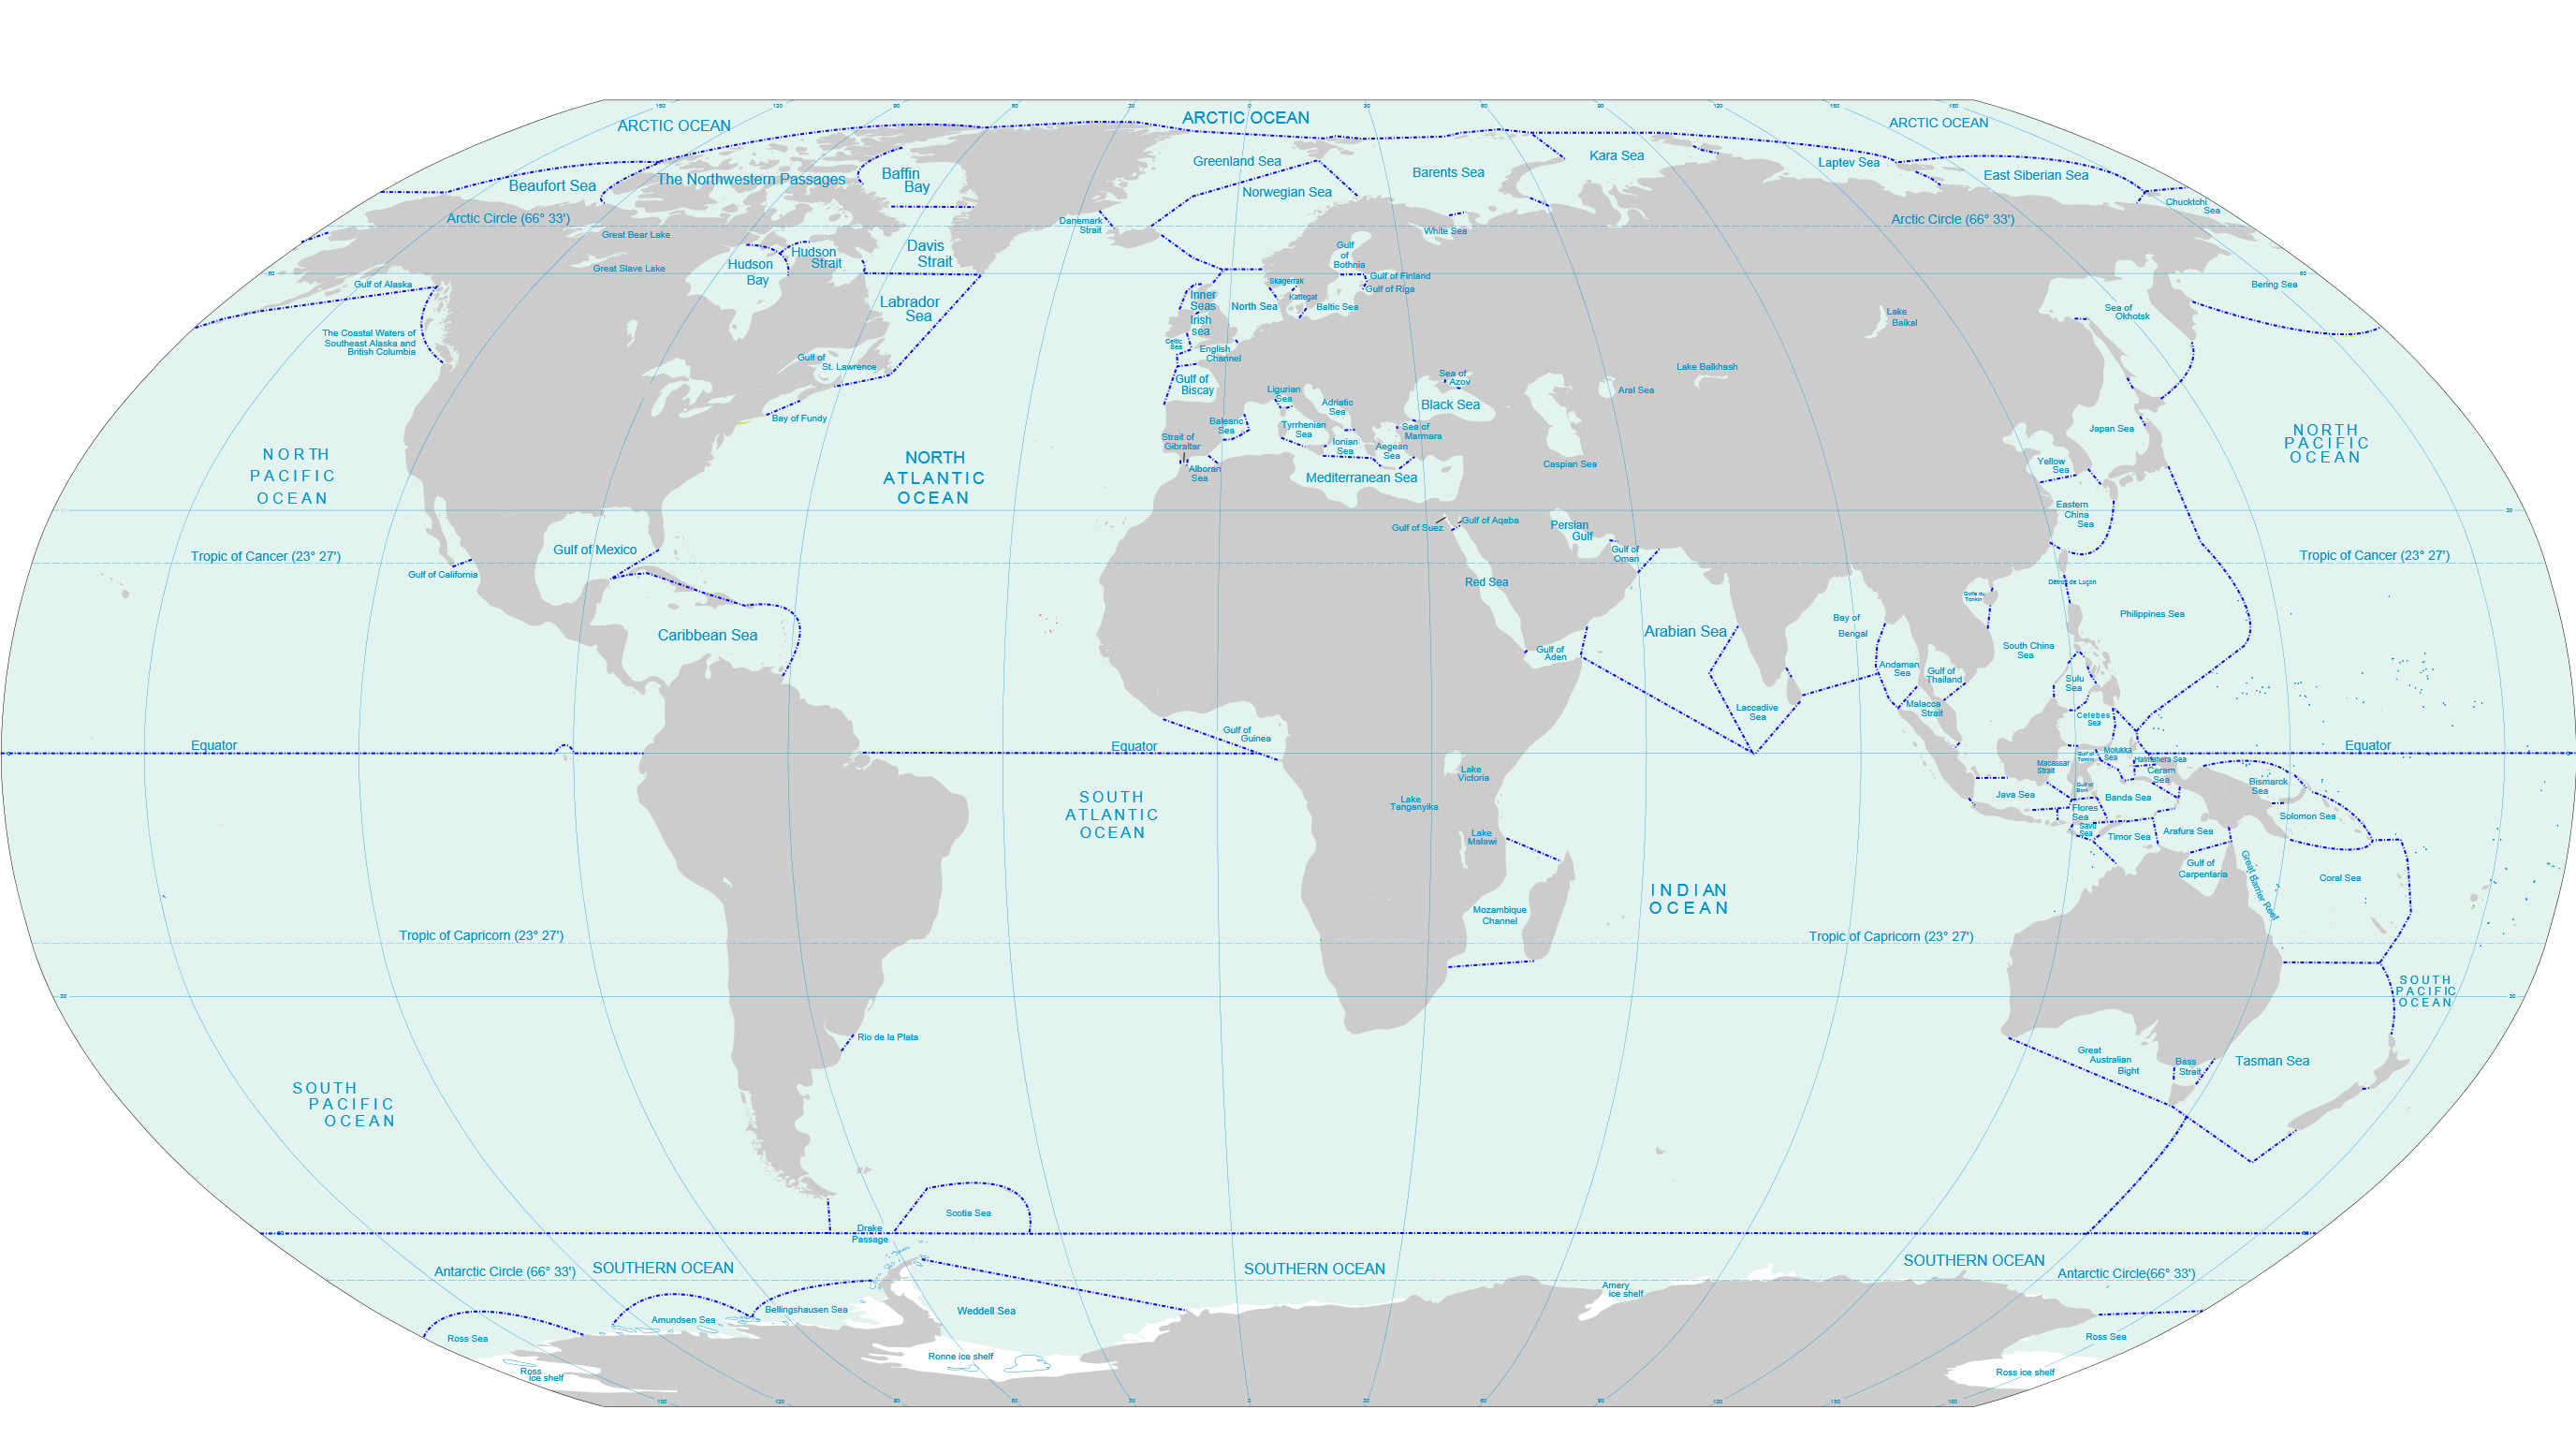 Map of world's seas and oceans by IHO.